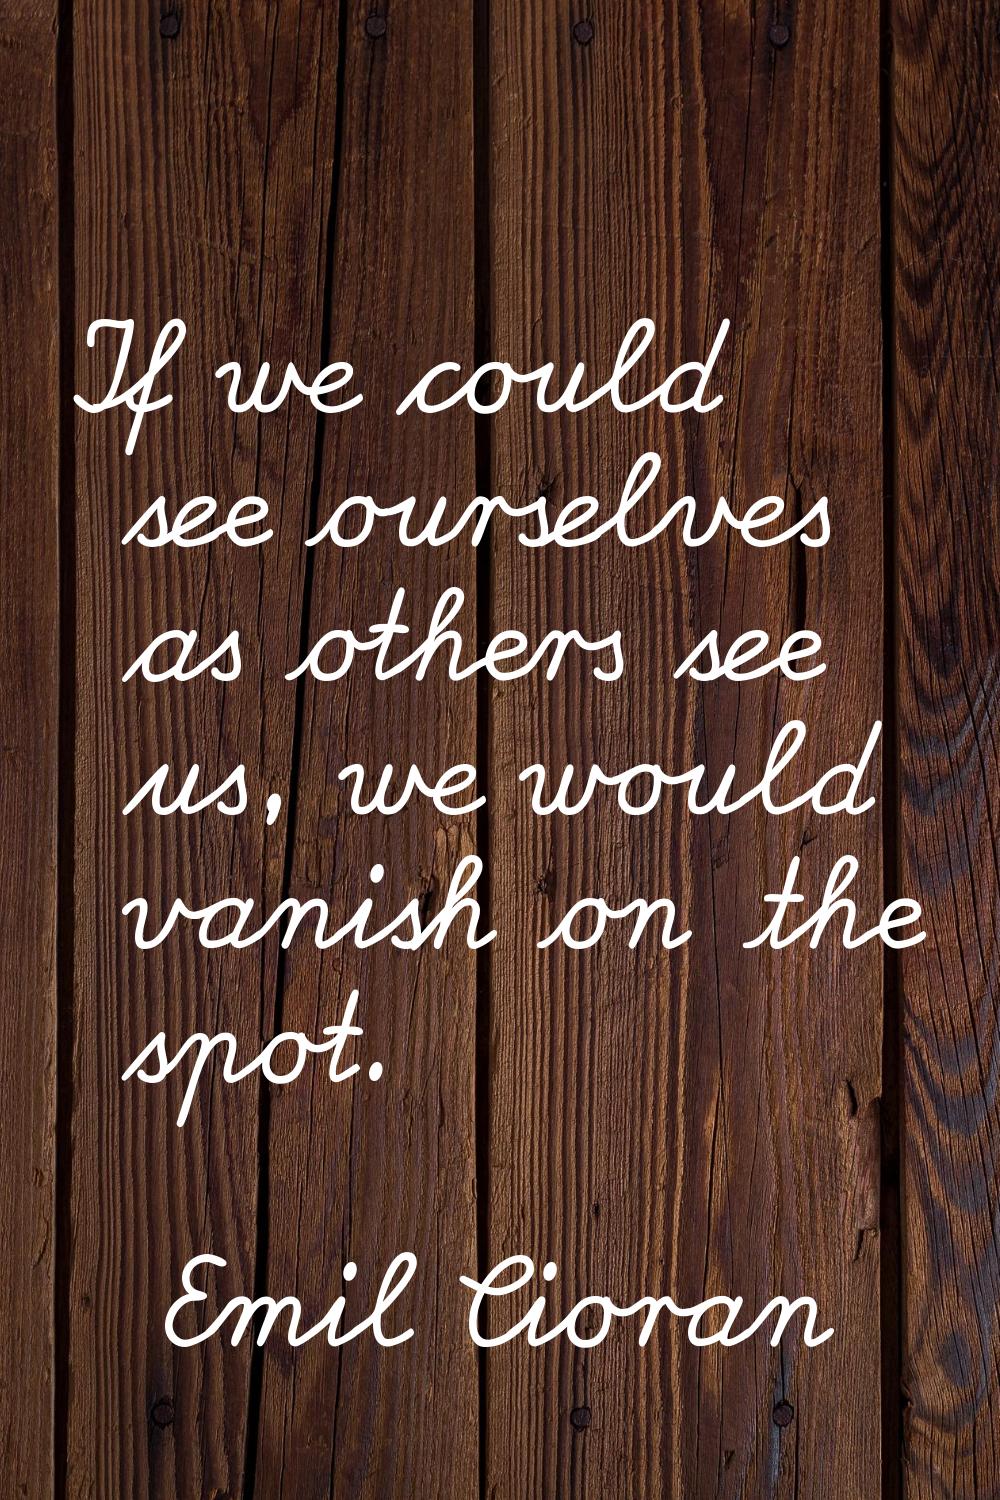 If we could see ourselves as others see us, we would vanish on the spot.